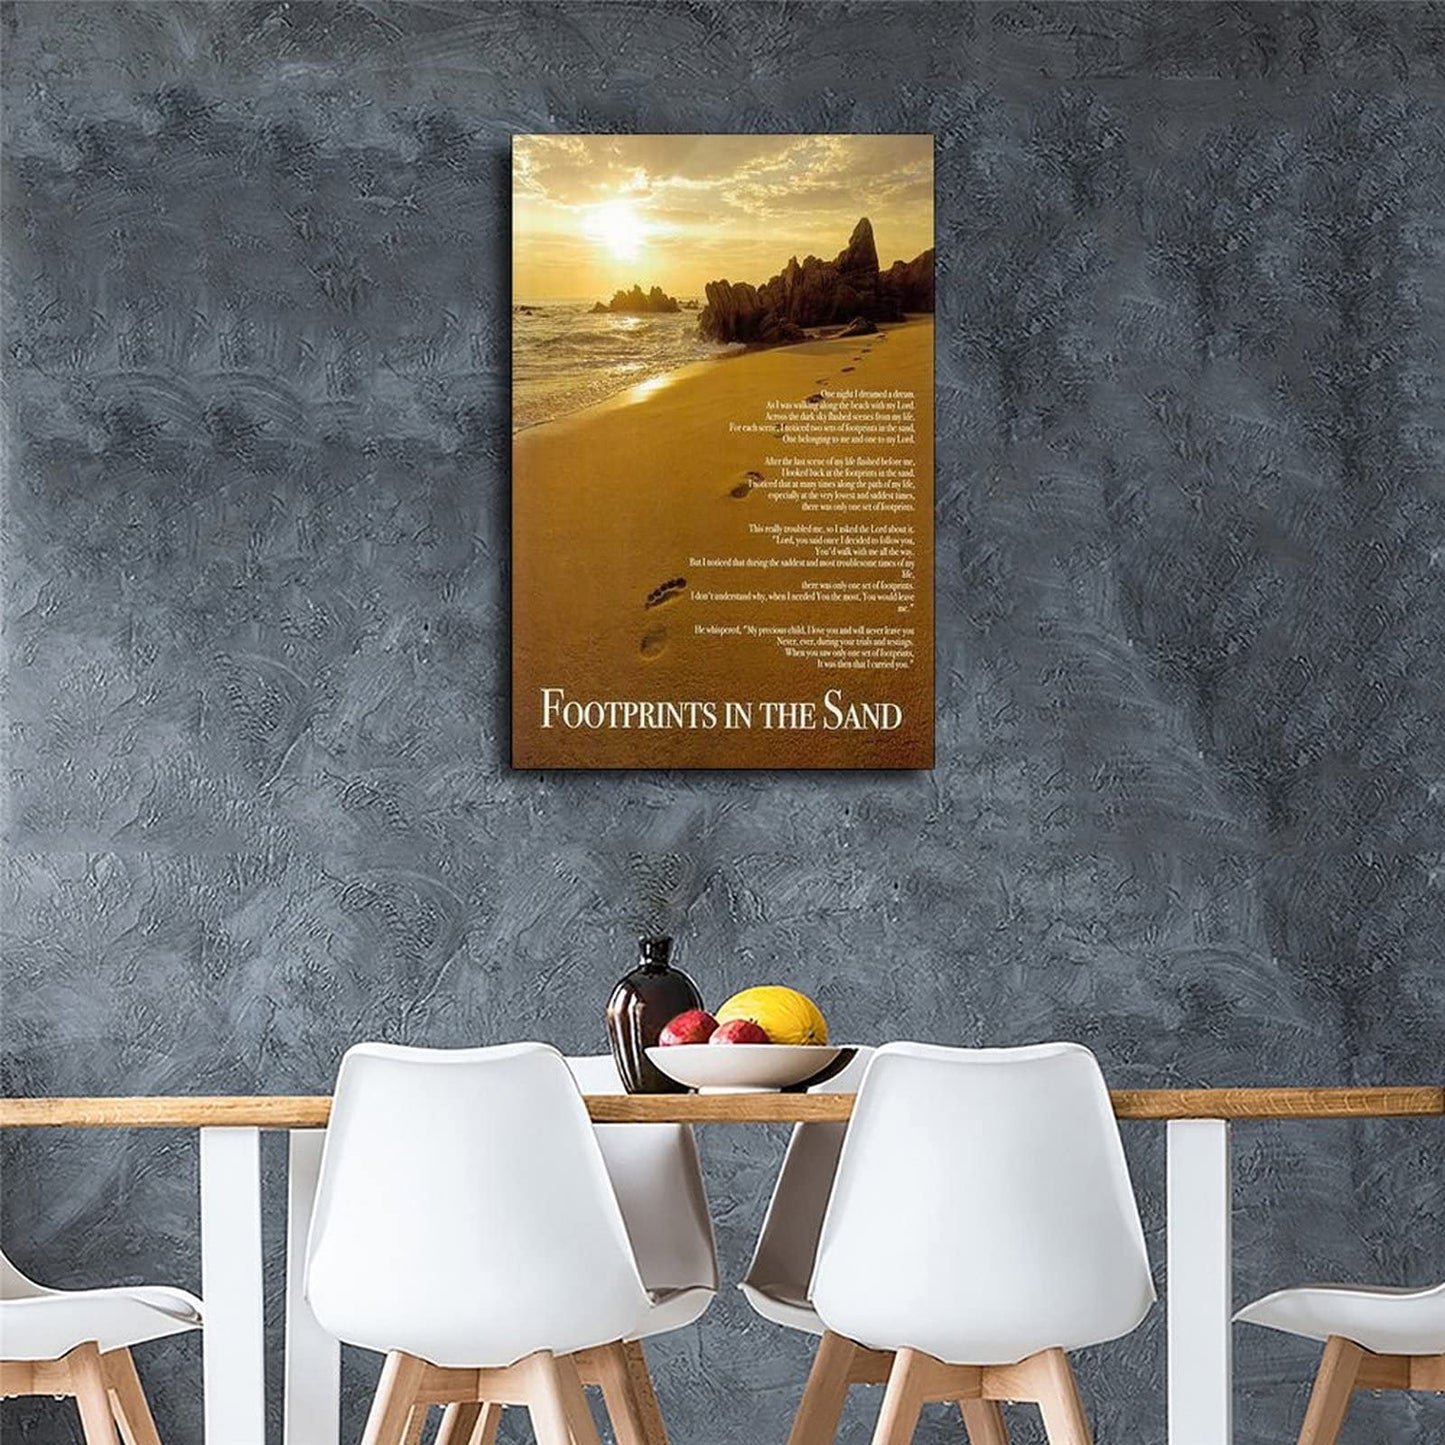 HXXI Picture Decor Footprints in The Sand Original Poem Posters HD Canvas Print Posters Modern Home Decor Wall Art Canvas UnFramed,08x12inch(20x30cm)